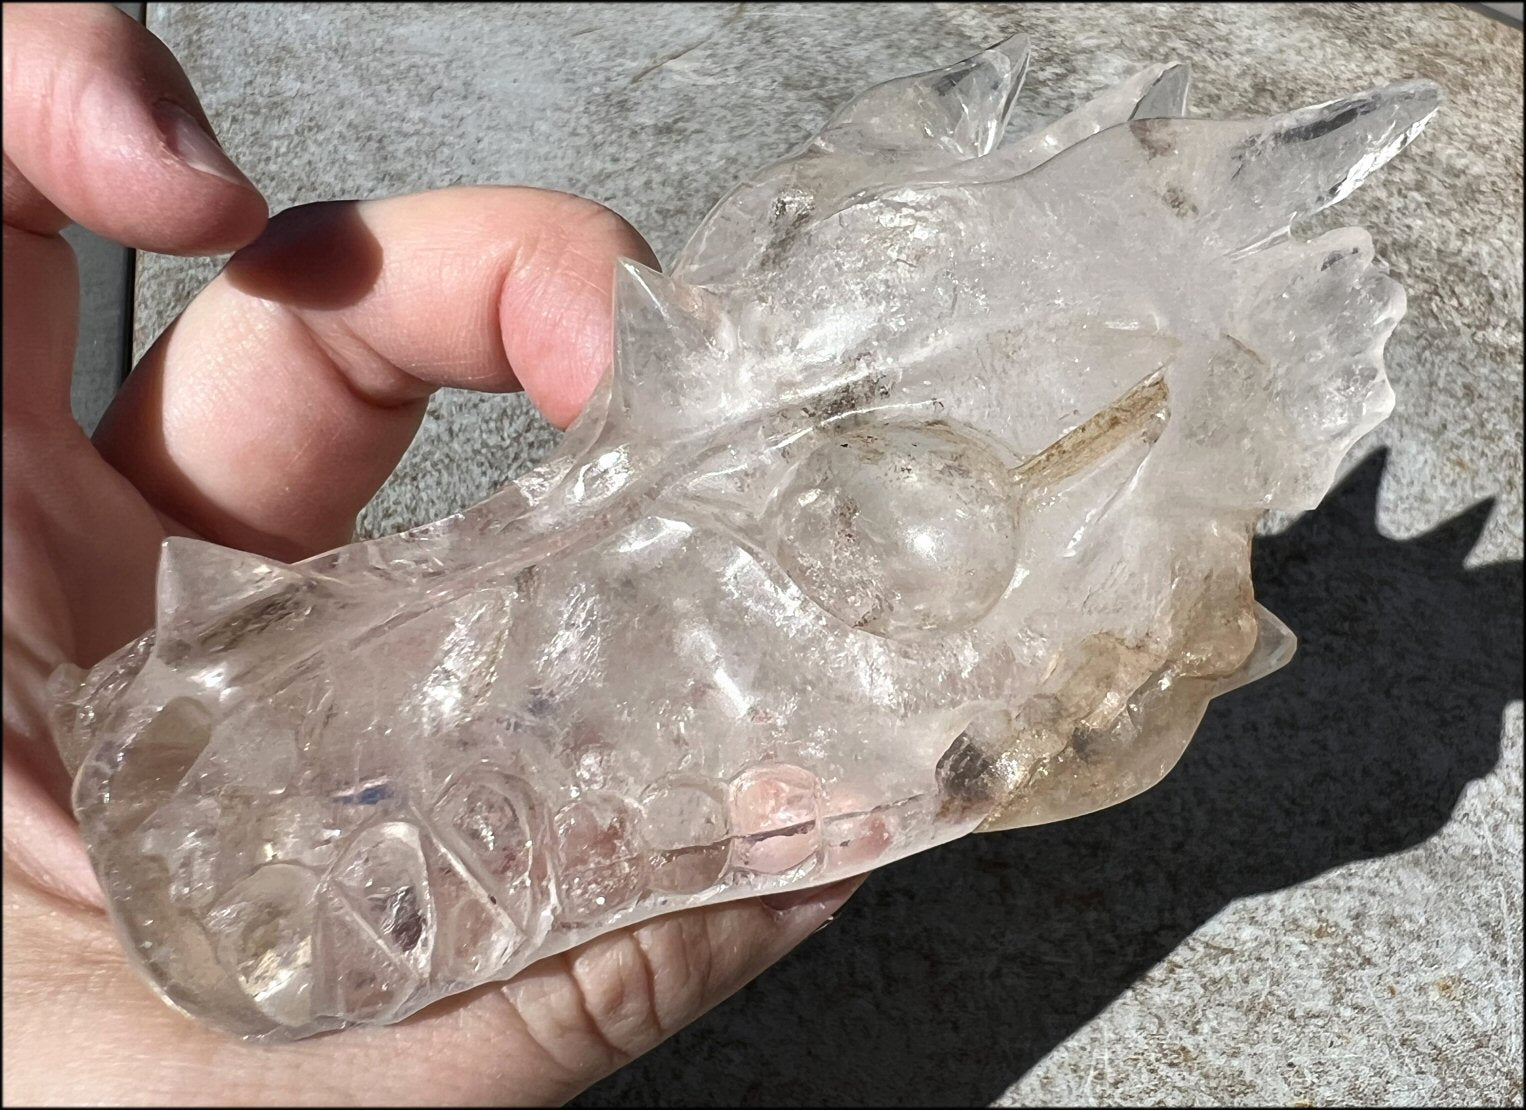 Large QUARTZ Dragon Crystal Skull with Hematite inclusions, beautiful shimmery areas!